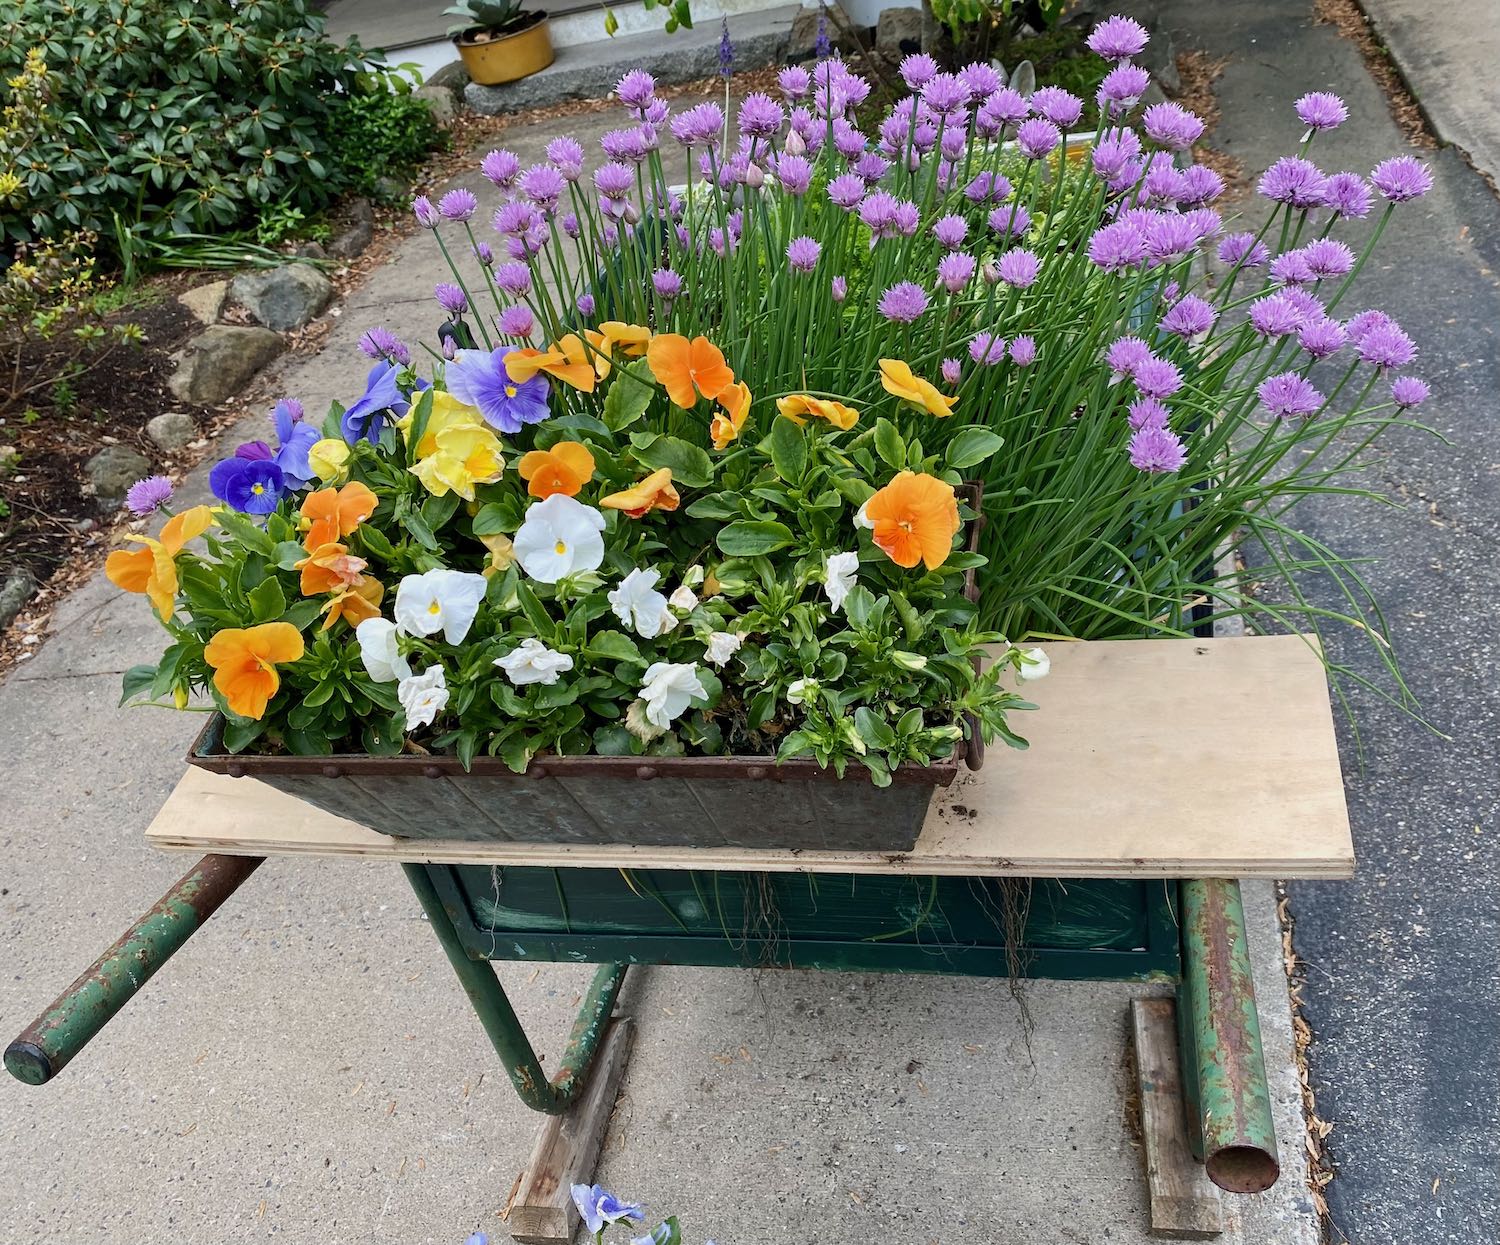 It's the weekend! Number 298, An Old Wheelbarrow with Chives, Garden Greens, and a Box of Pansies Resting on the Handles